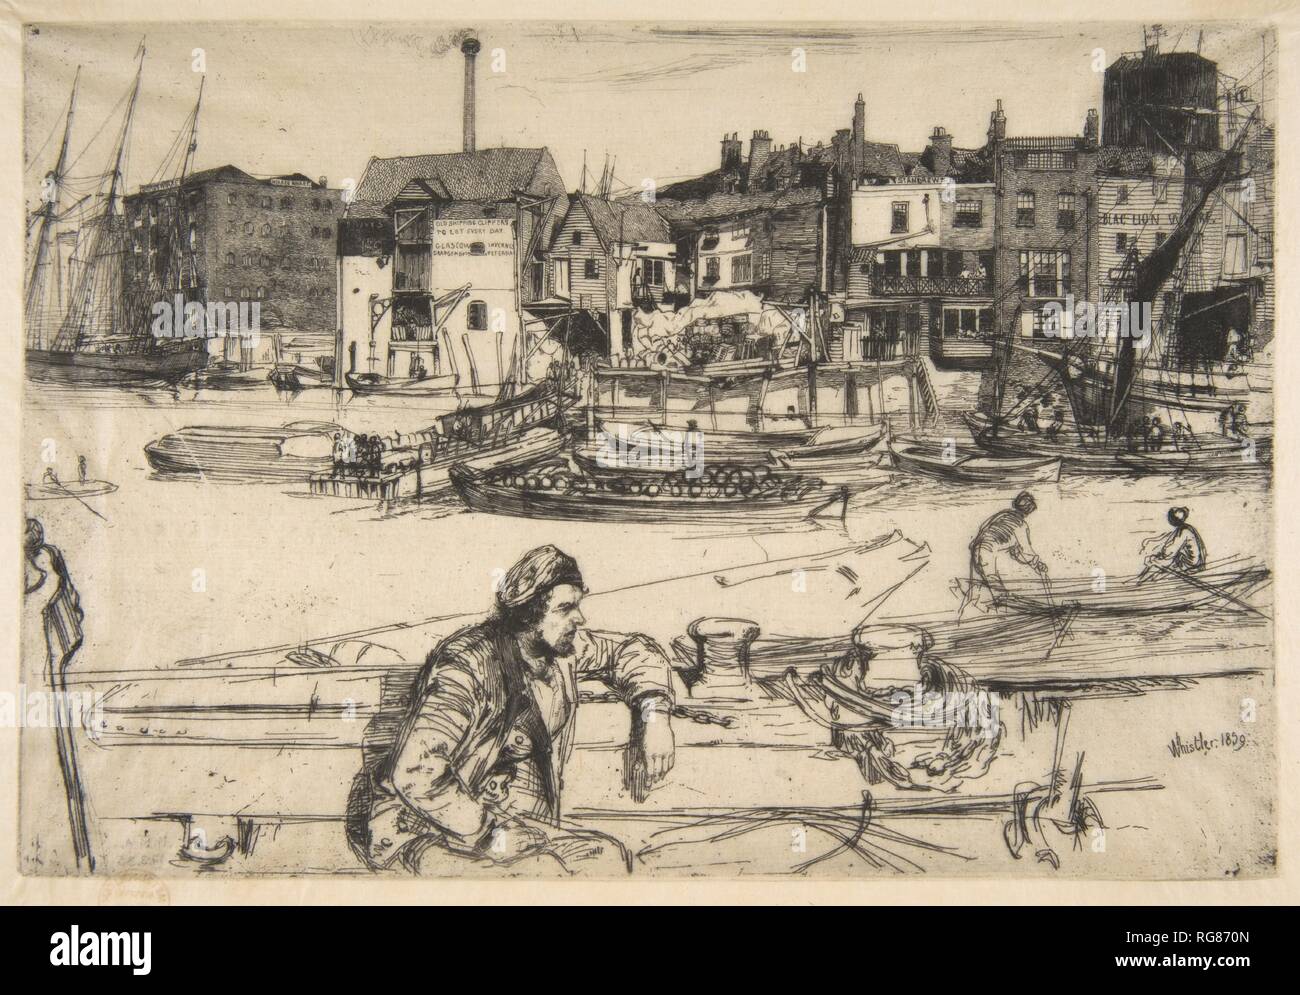 Black Lion Wharf. Artist: James McNeill Whistler (American, Lowell, Massachusetts 1834-1903 London). Dimensions: Plate: 5 7/8 × 8 11/16 in. (15 × 22.1 cm)  Sheet: 7 1/16 × 9 3/4 in. (18 × 24.7 cm). Series/Portfolio: Thames Set ('A Series of Sixteen Etchings of Scenes on the Thames and Other Subjects' 1871). Date: 1859. Museum: Metropolitan Museum of Art, New York, USA. Author: WHISTLER, JAMES ABBOTT MCNEILL. after James McNeill Whistler. Engraved by Carl Hentschel. Stock Photo